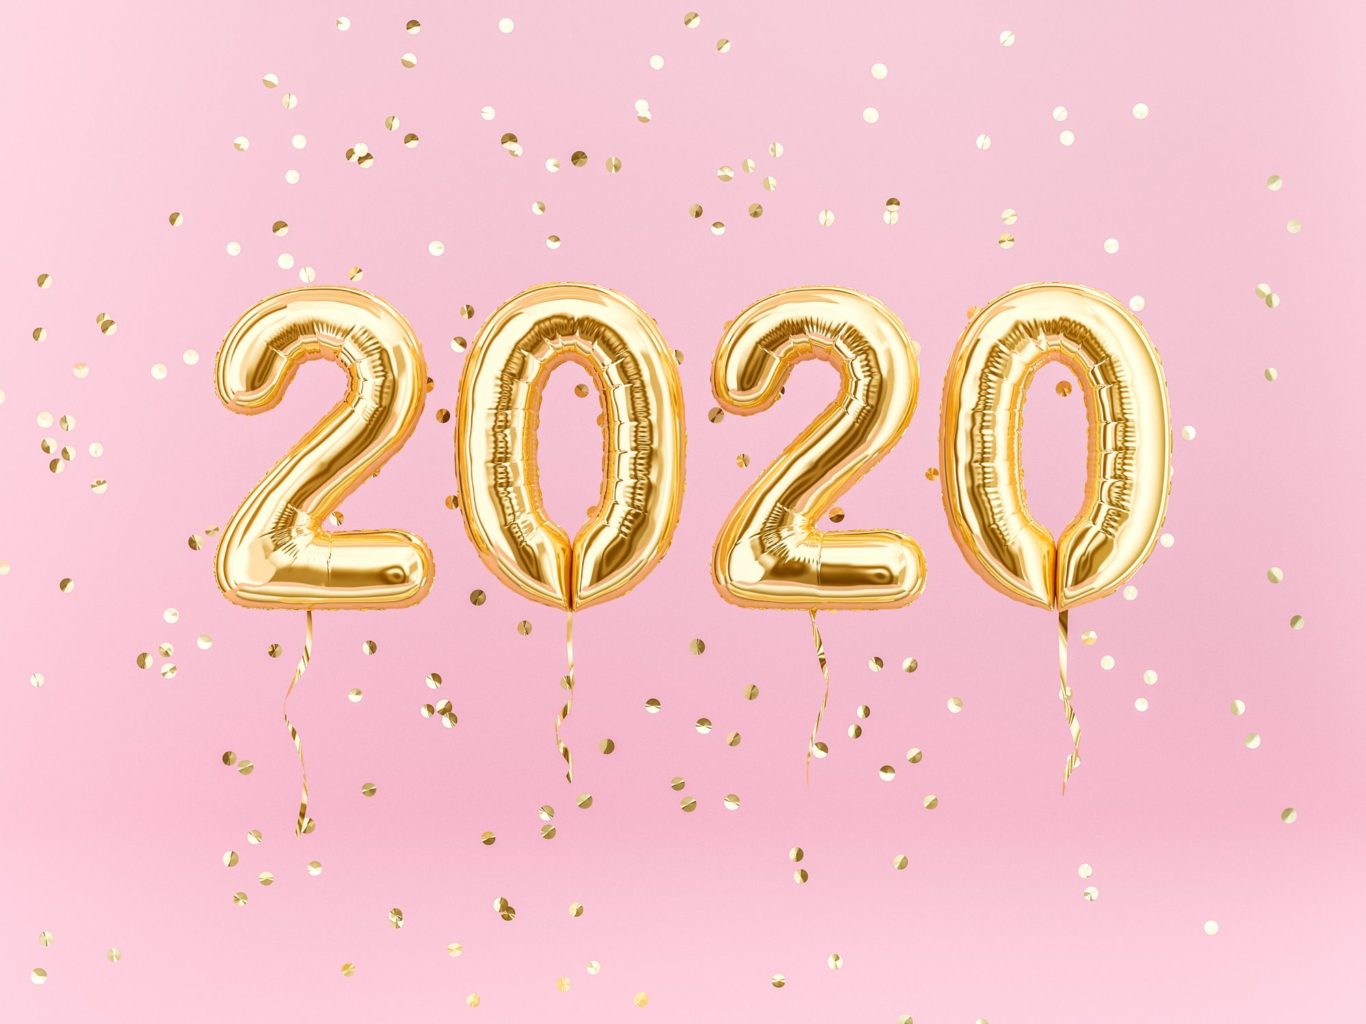 2020 in gold balloons on a pink background